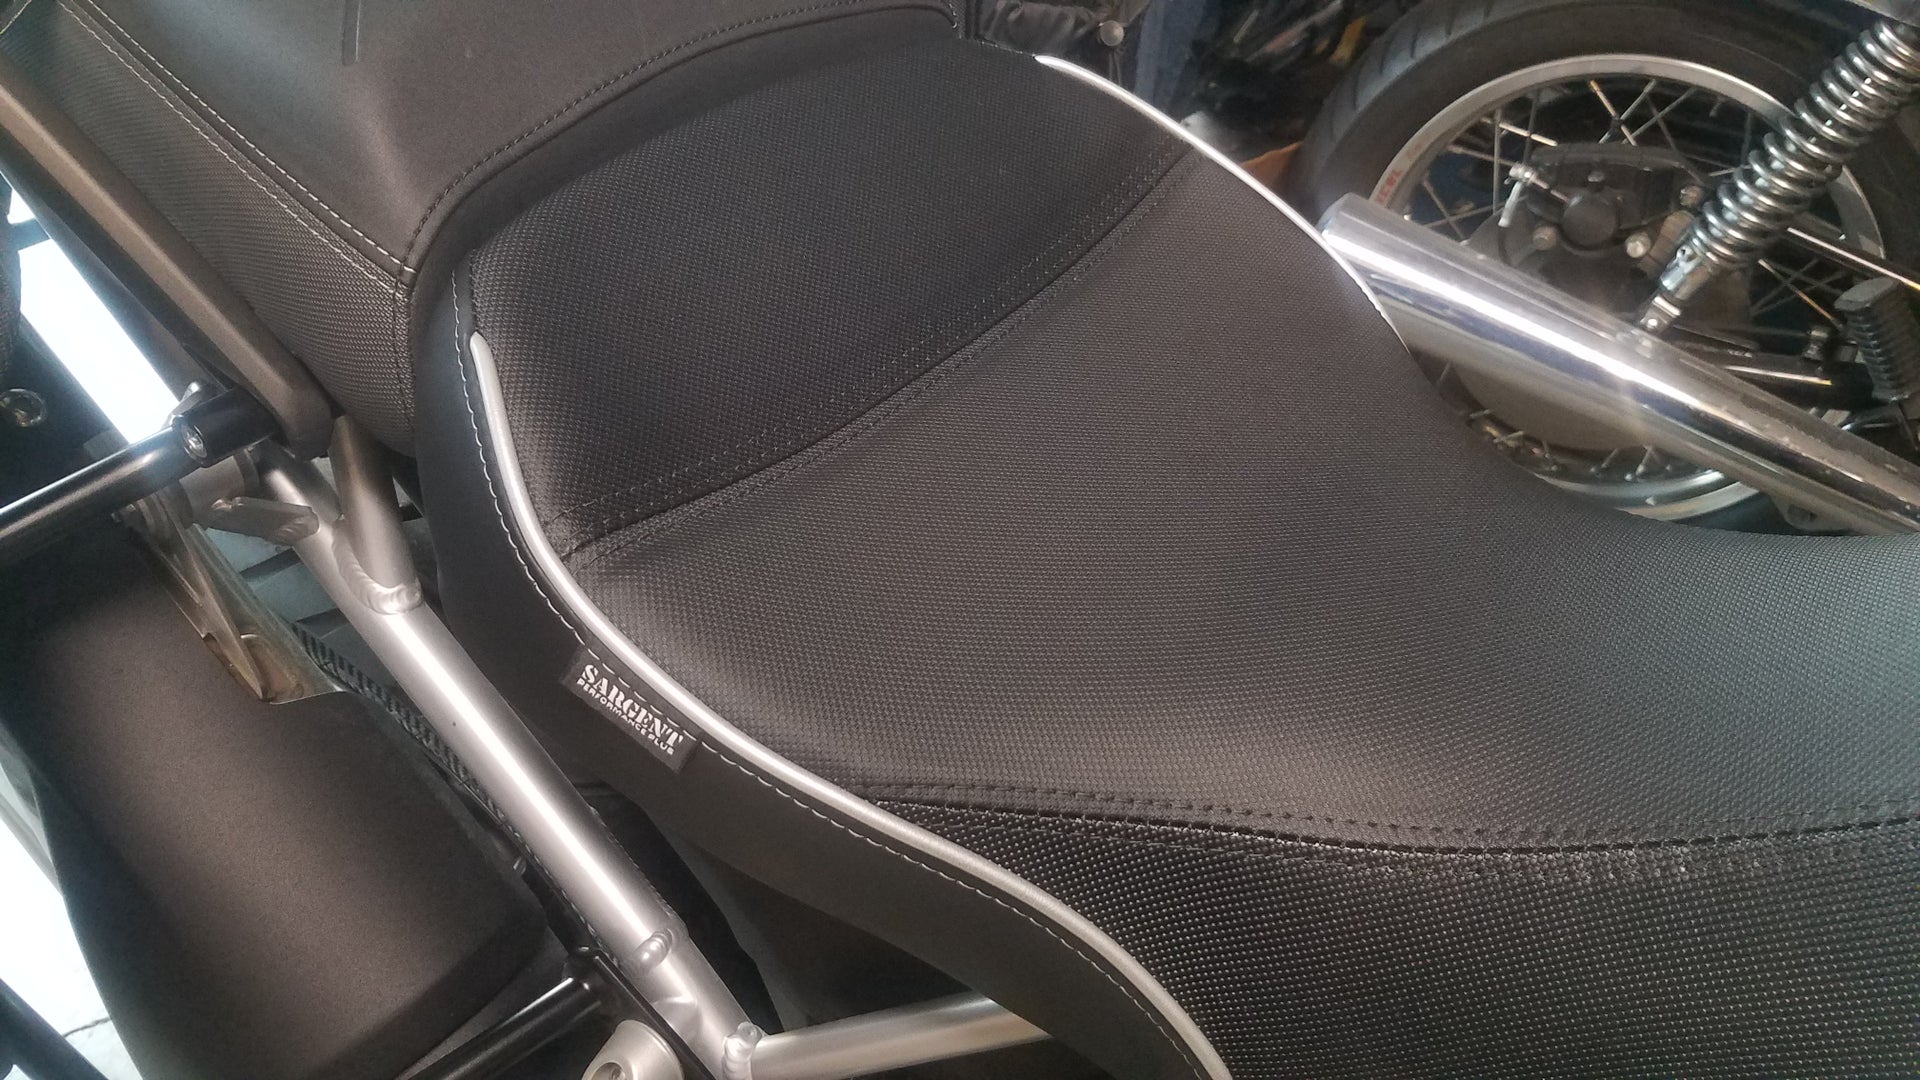 Fyi Sargent Seats For 2020 Tiger 900